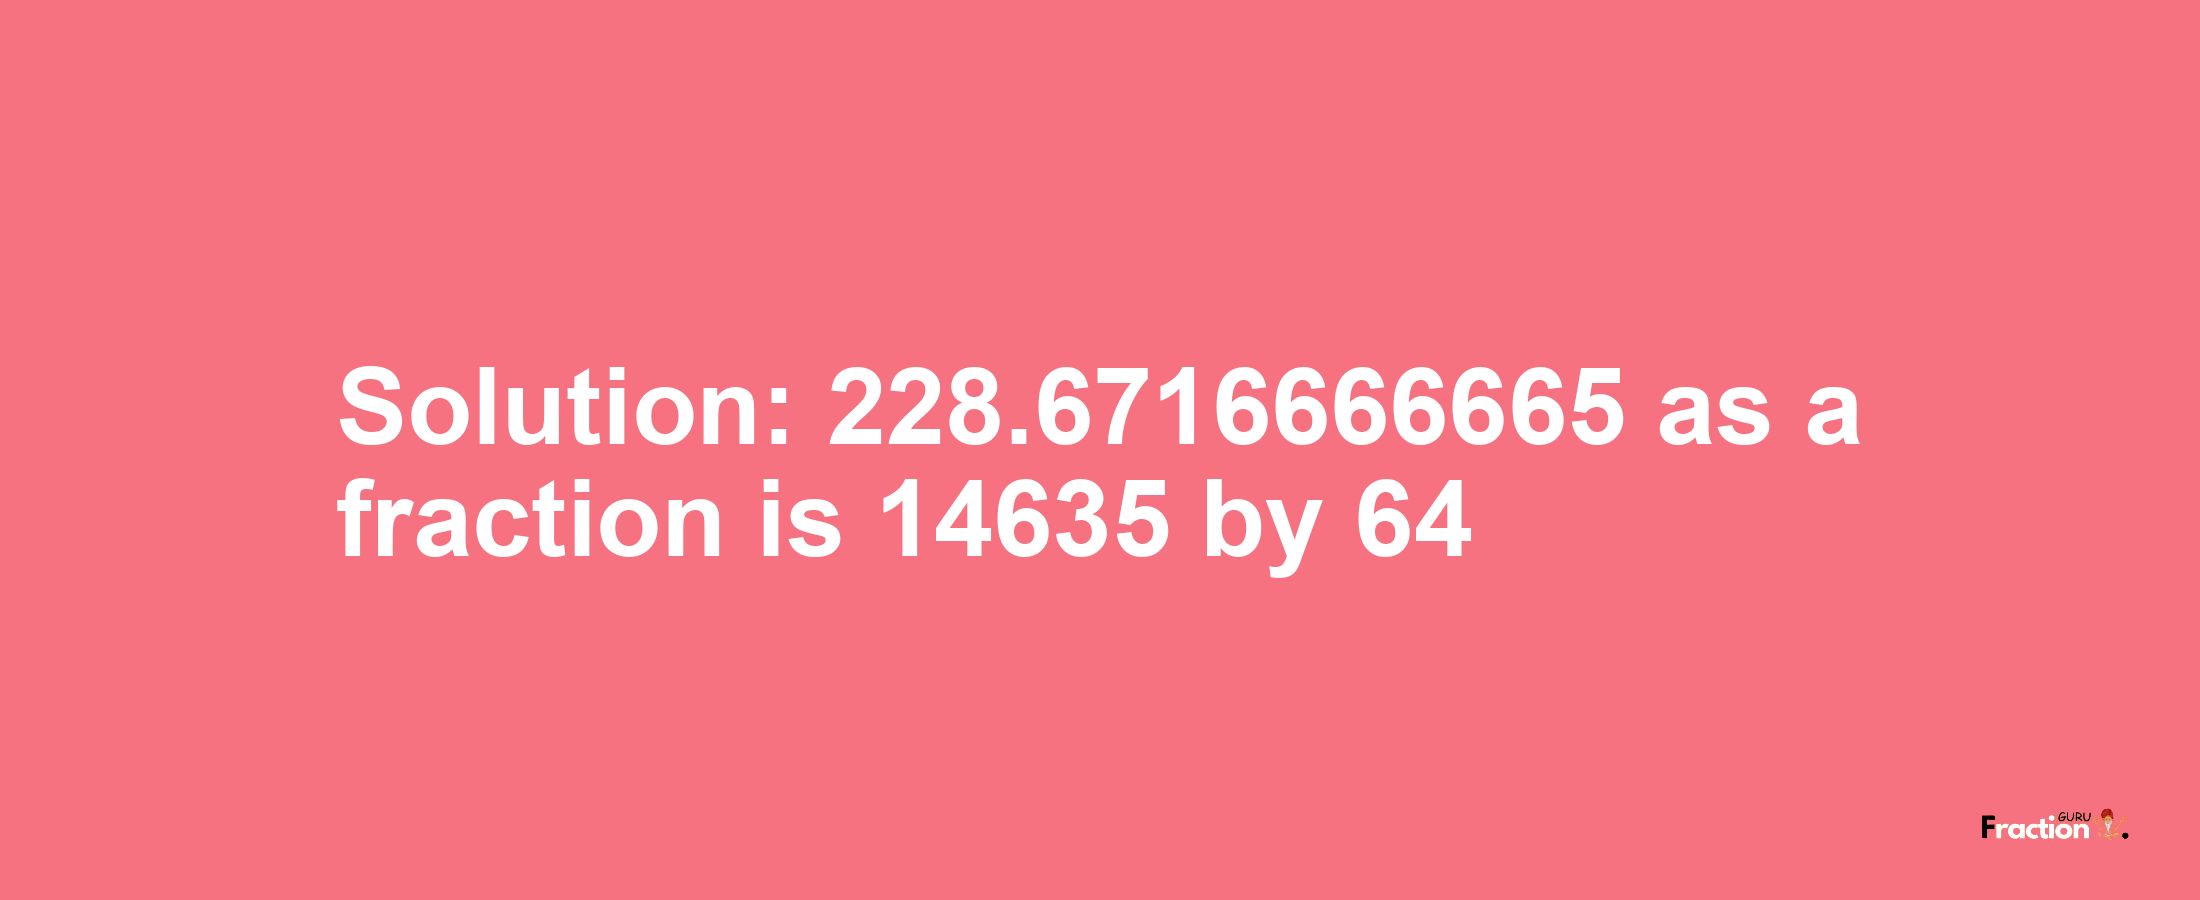 Solution:228.6716666665 as a fraction is 14635/64